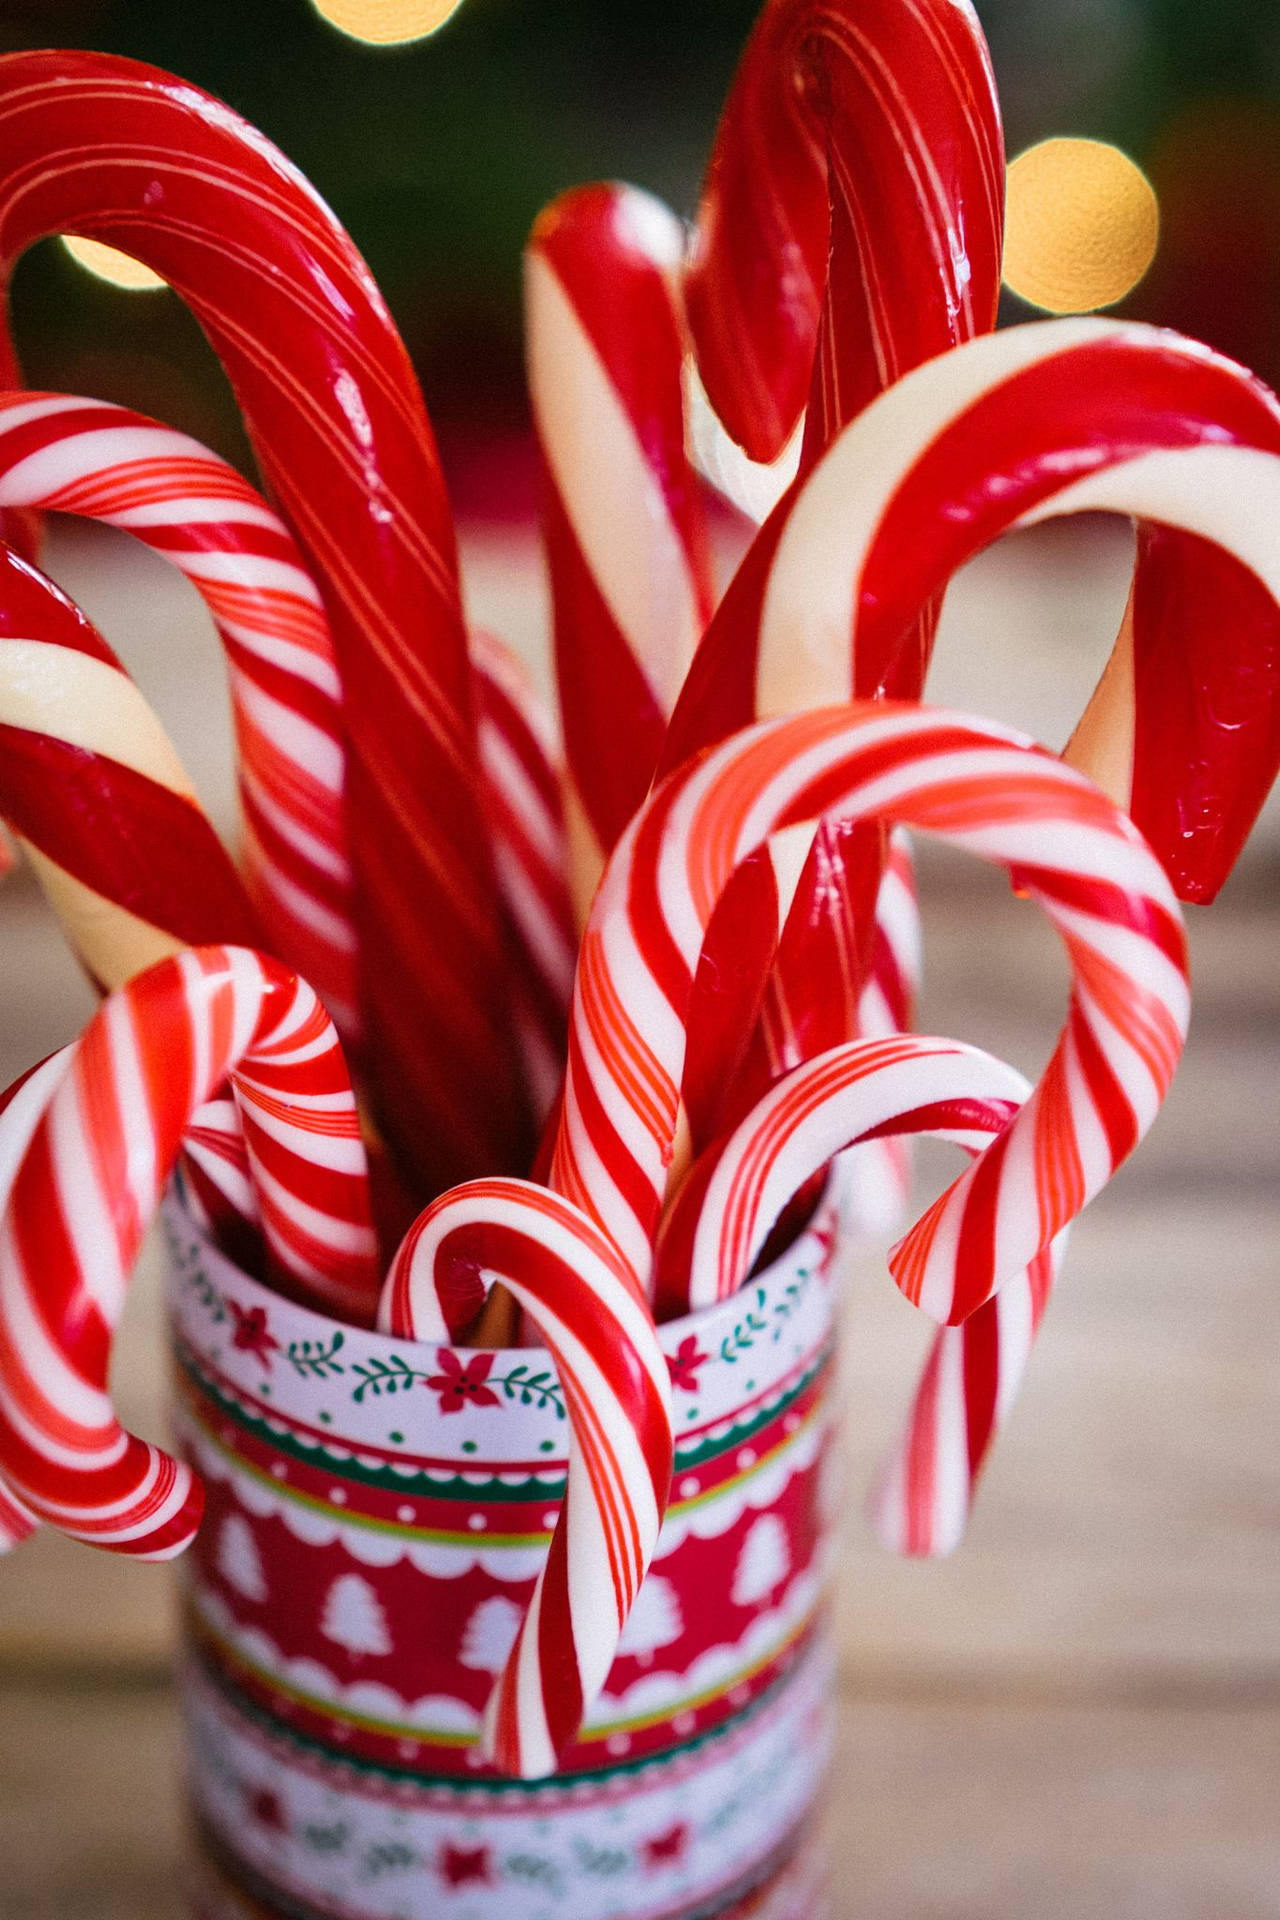 Candy Canes In Mug Wallpaper